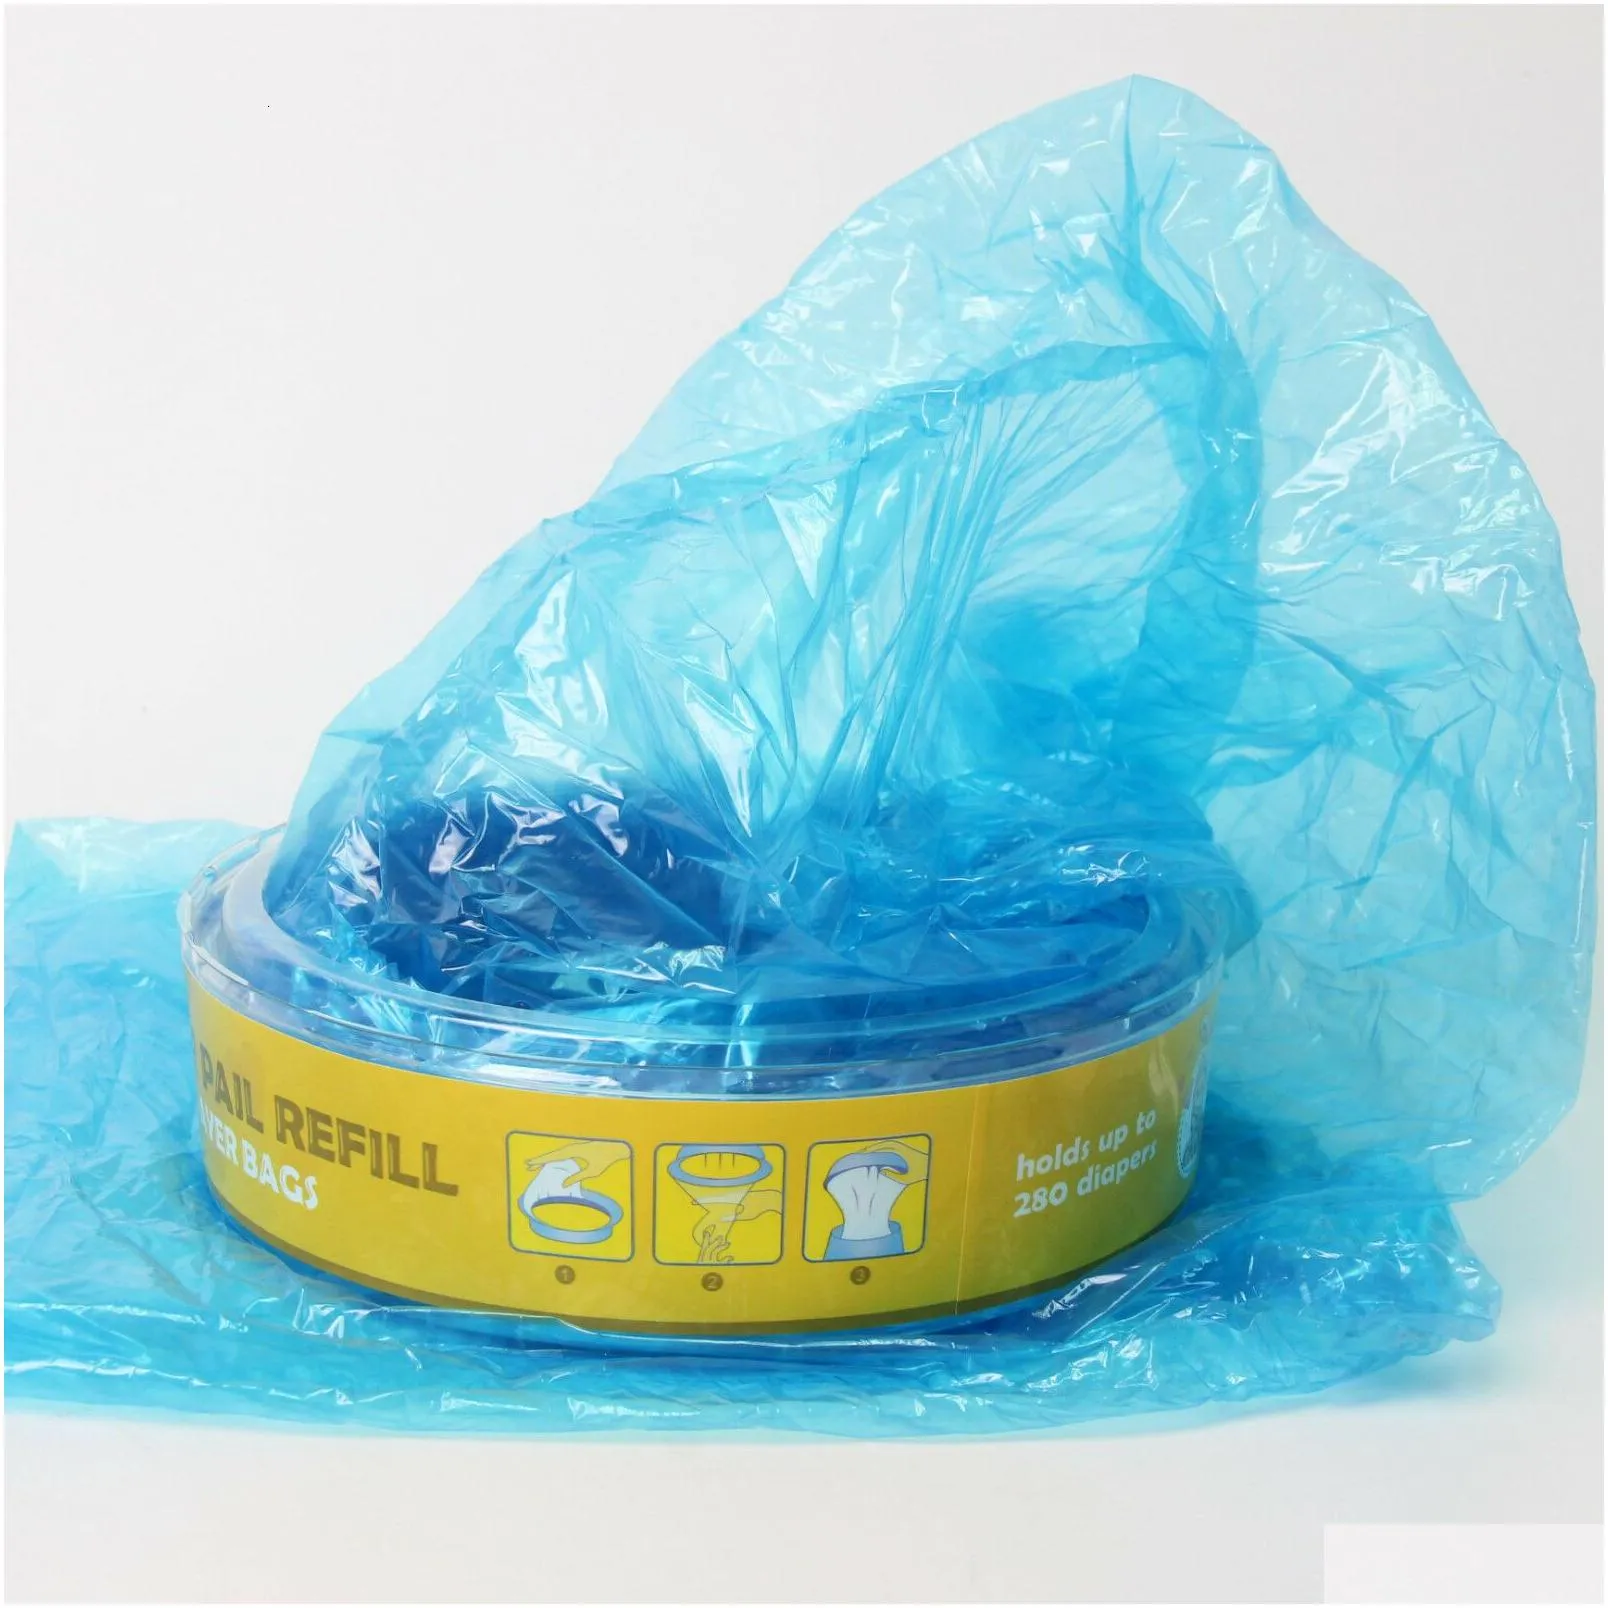 trash bags 4pcs diaper bucket replacement bag replacement cartridge 7500mm refill cartridges for angelcare diaper glue systems garbage bags